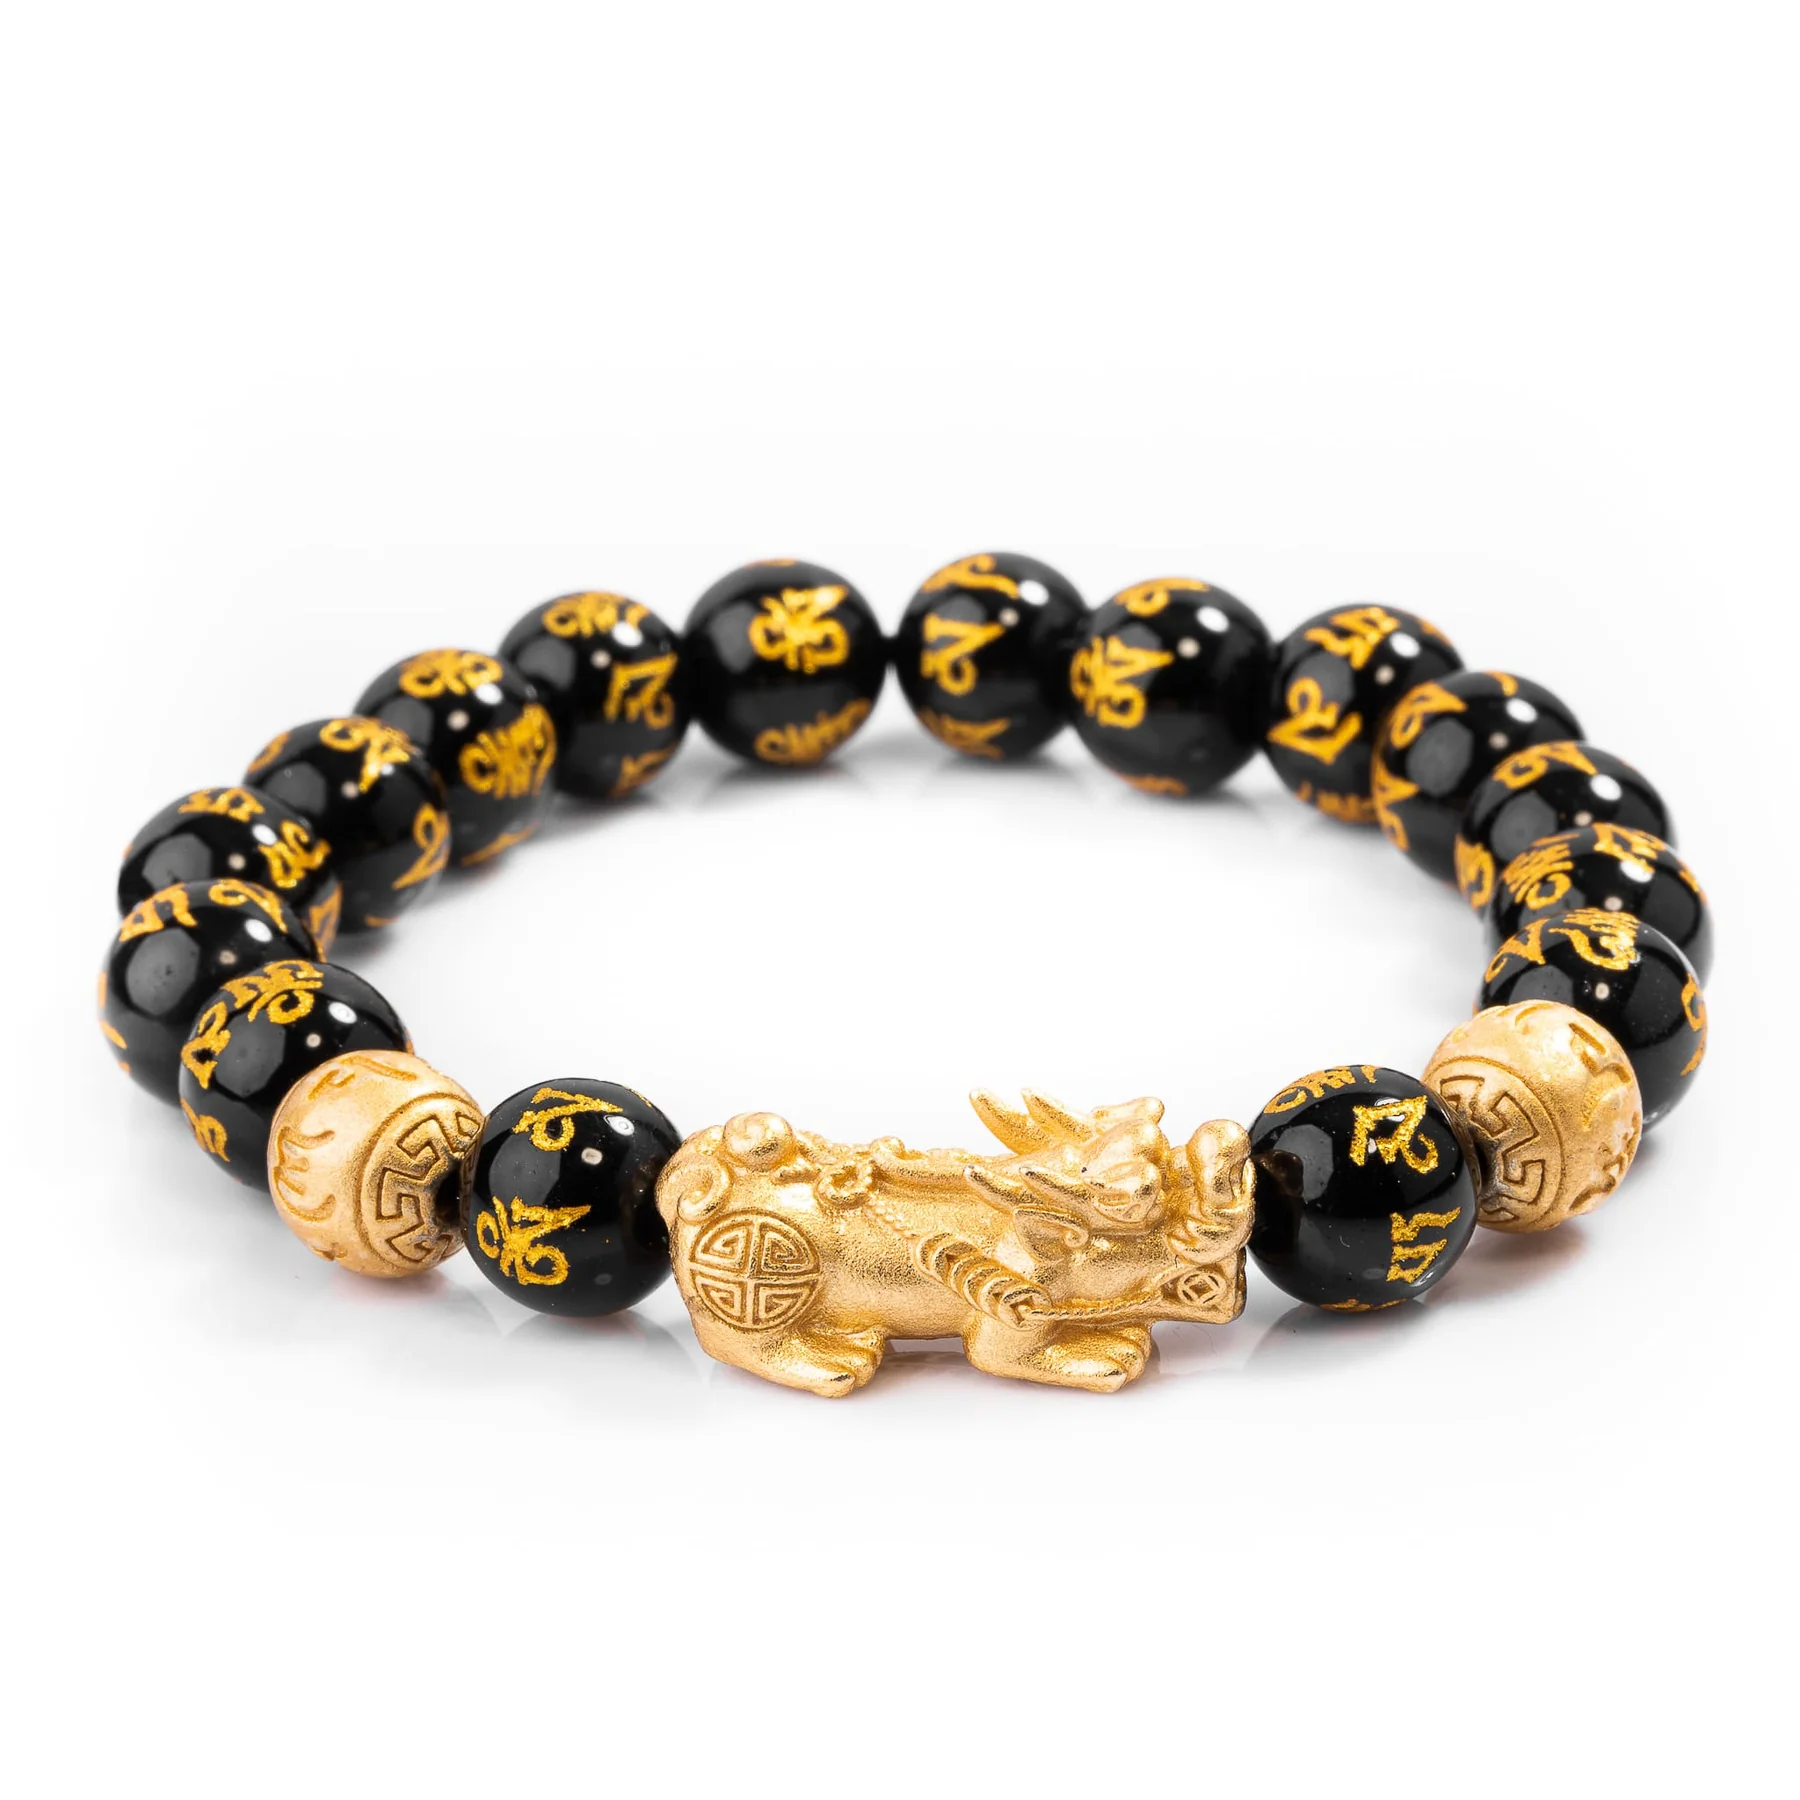 🎊Congratulations on getting 50% OFF - 💸Feng Shui Pixiu Wealth Bracelet - Attract Wealth🎁